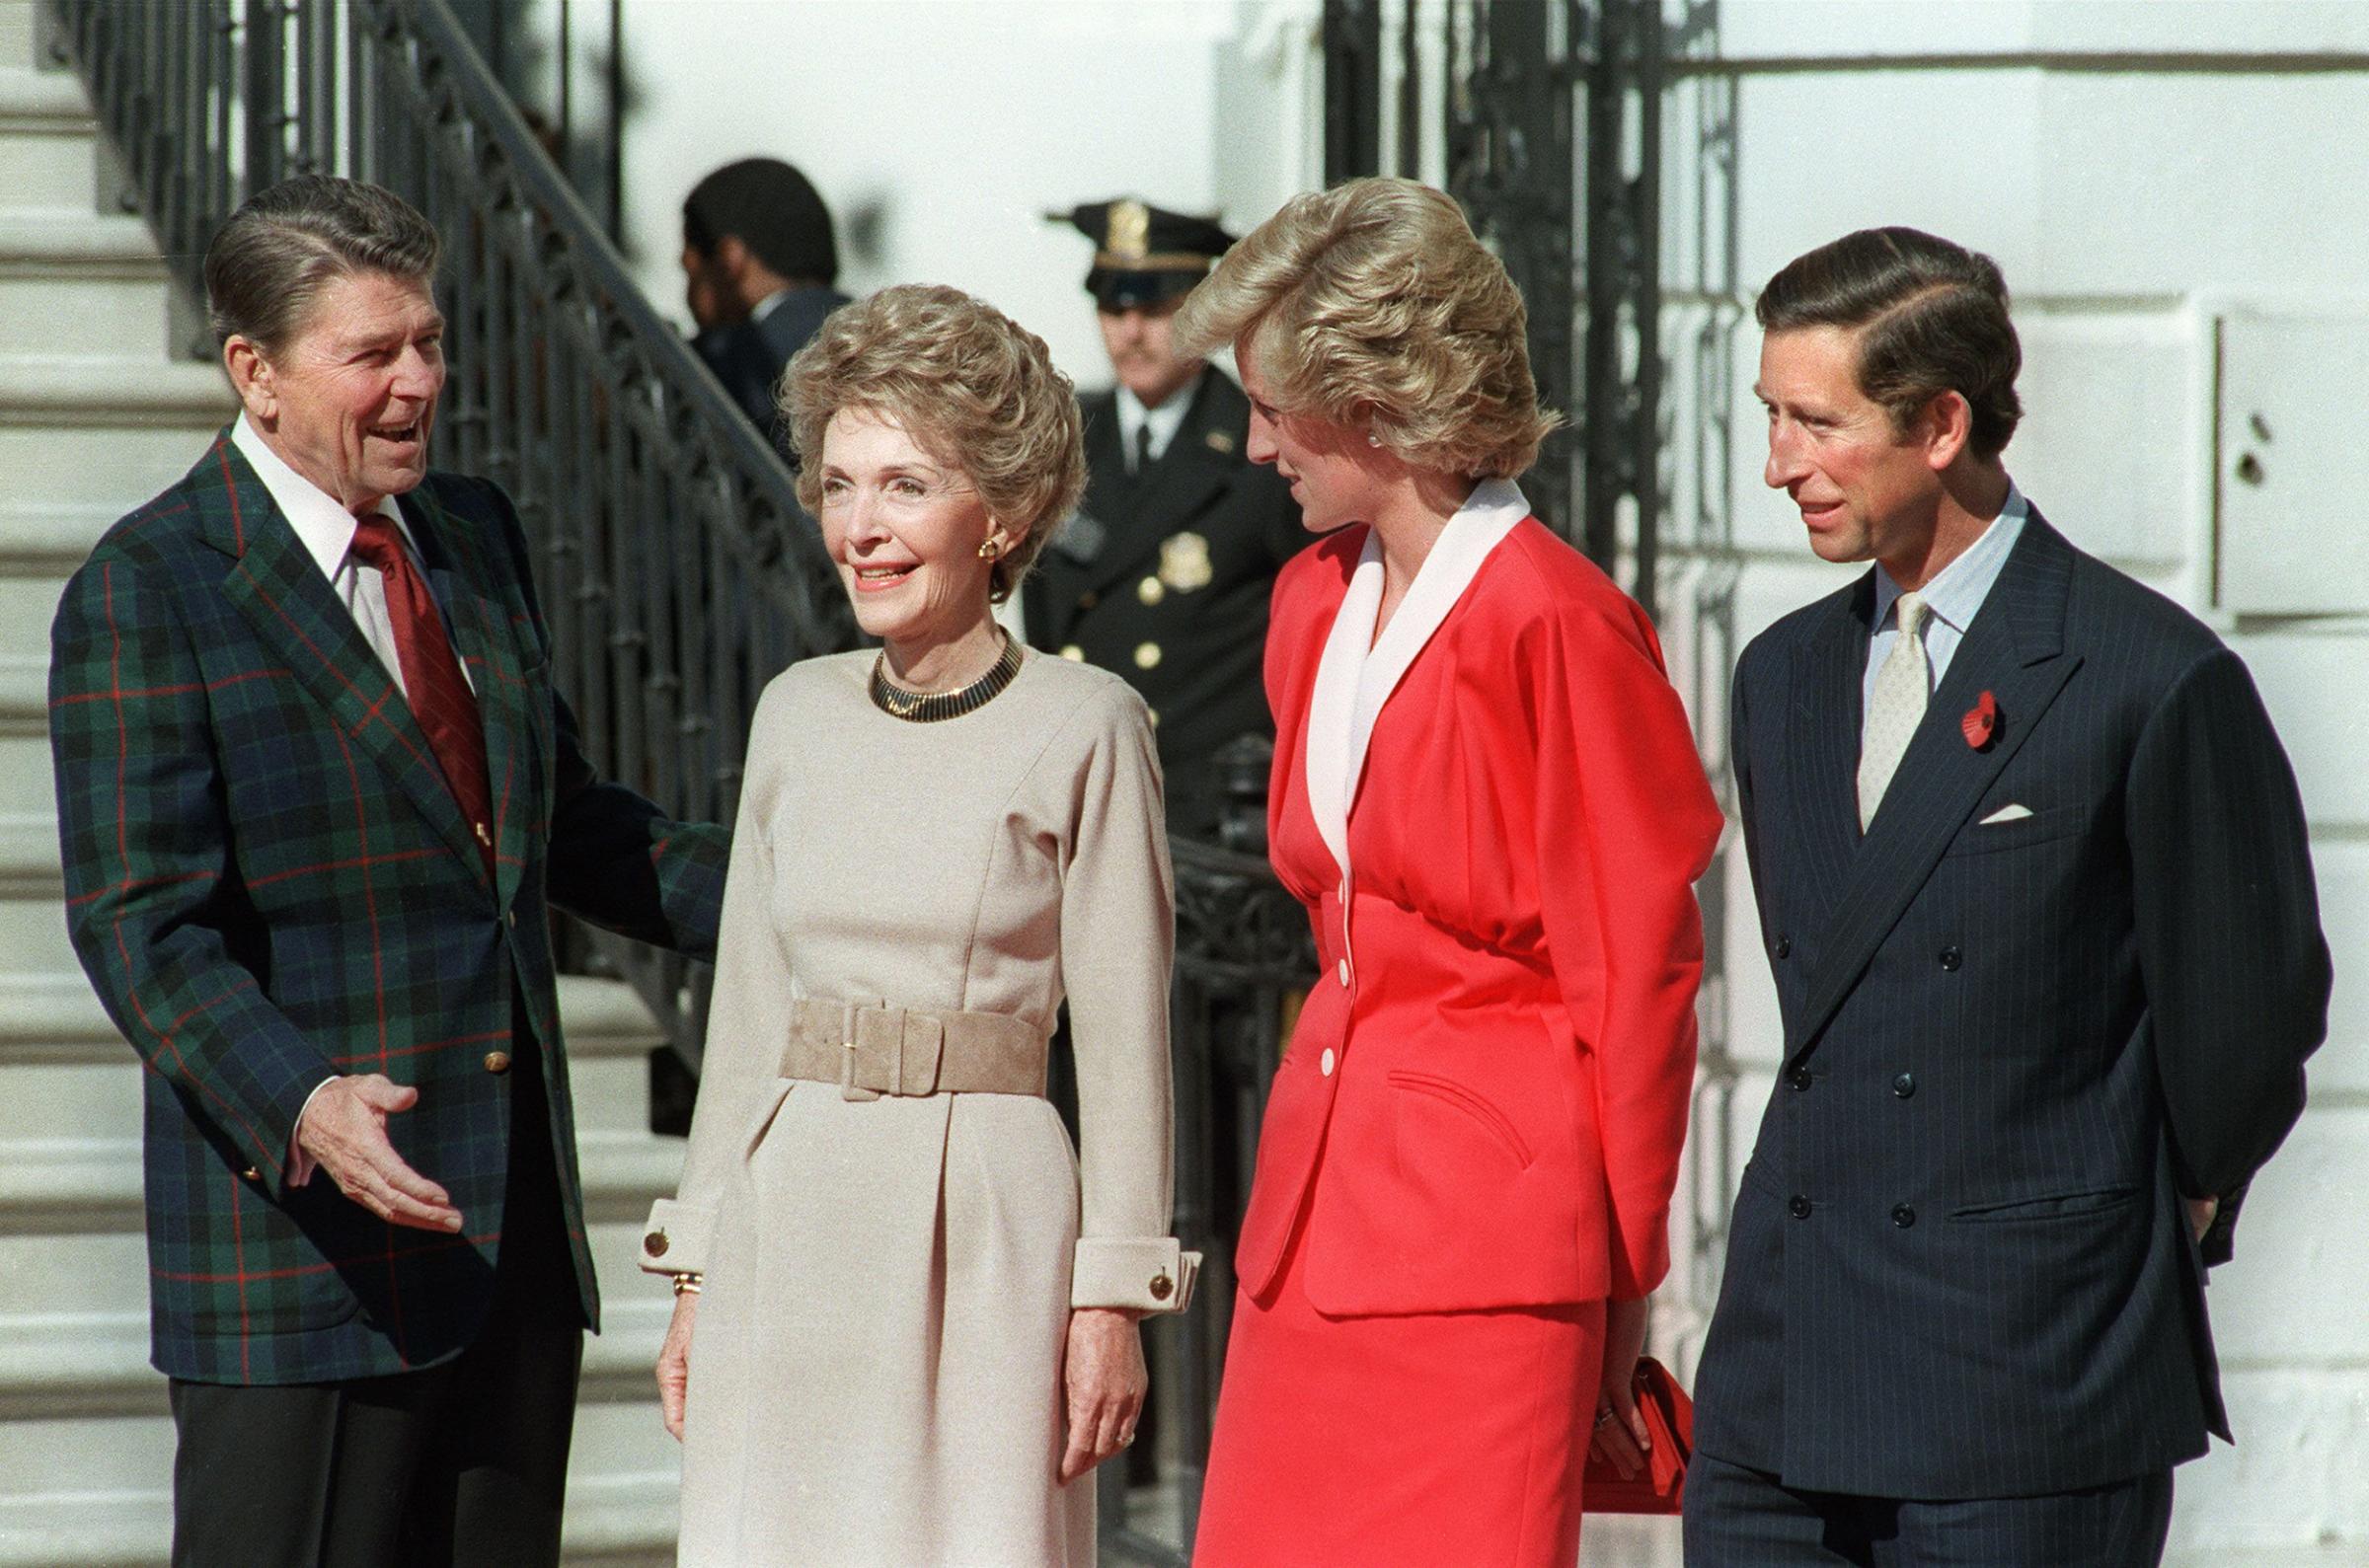 Ronald Reagan and Nancy Reagan welcoming to the White House Princess Diana and her husband Prince Charles on Nov. 09, 1985.